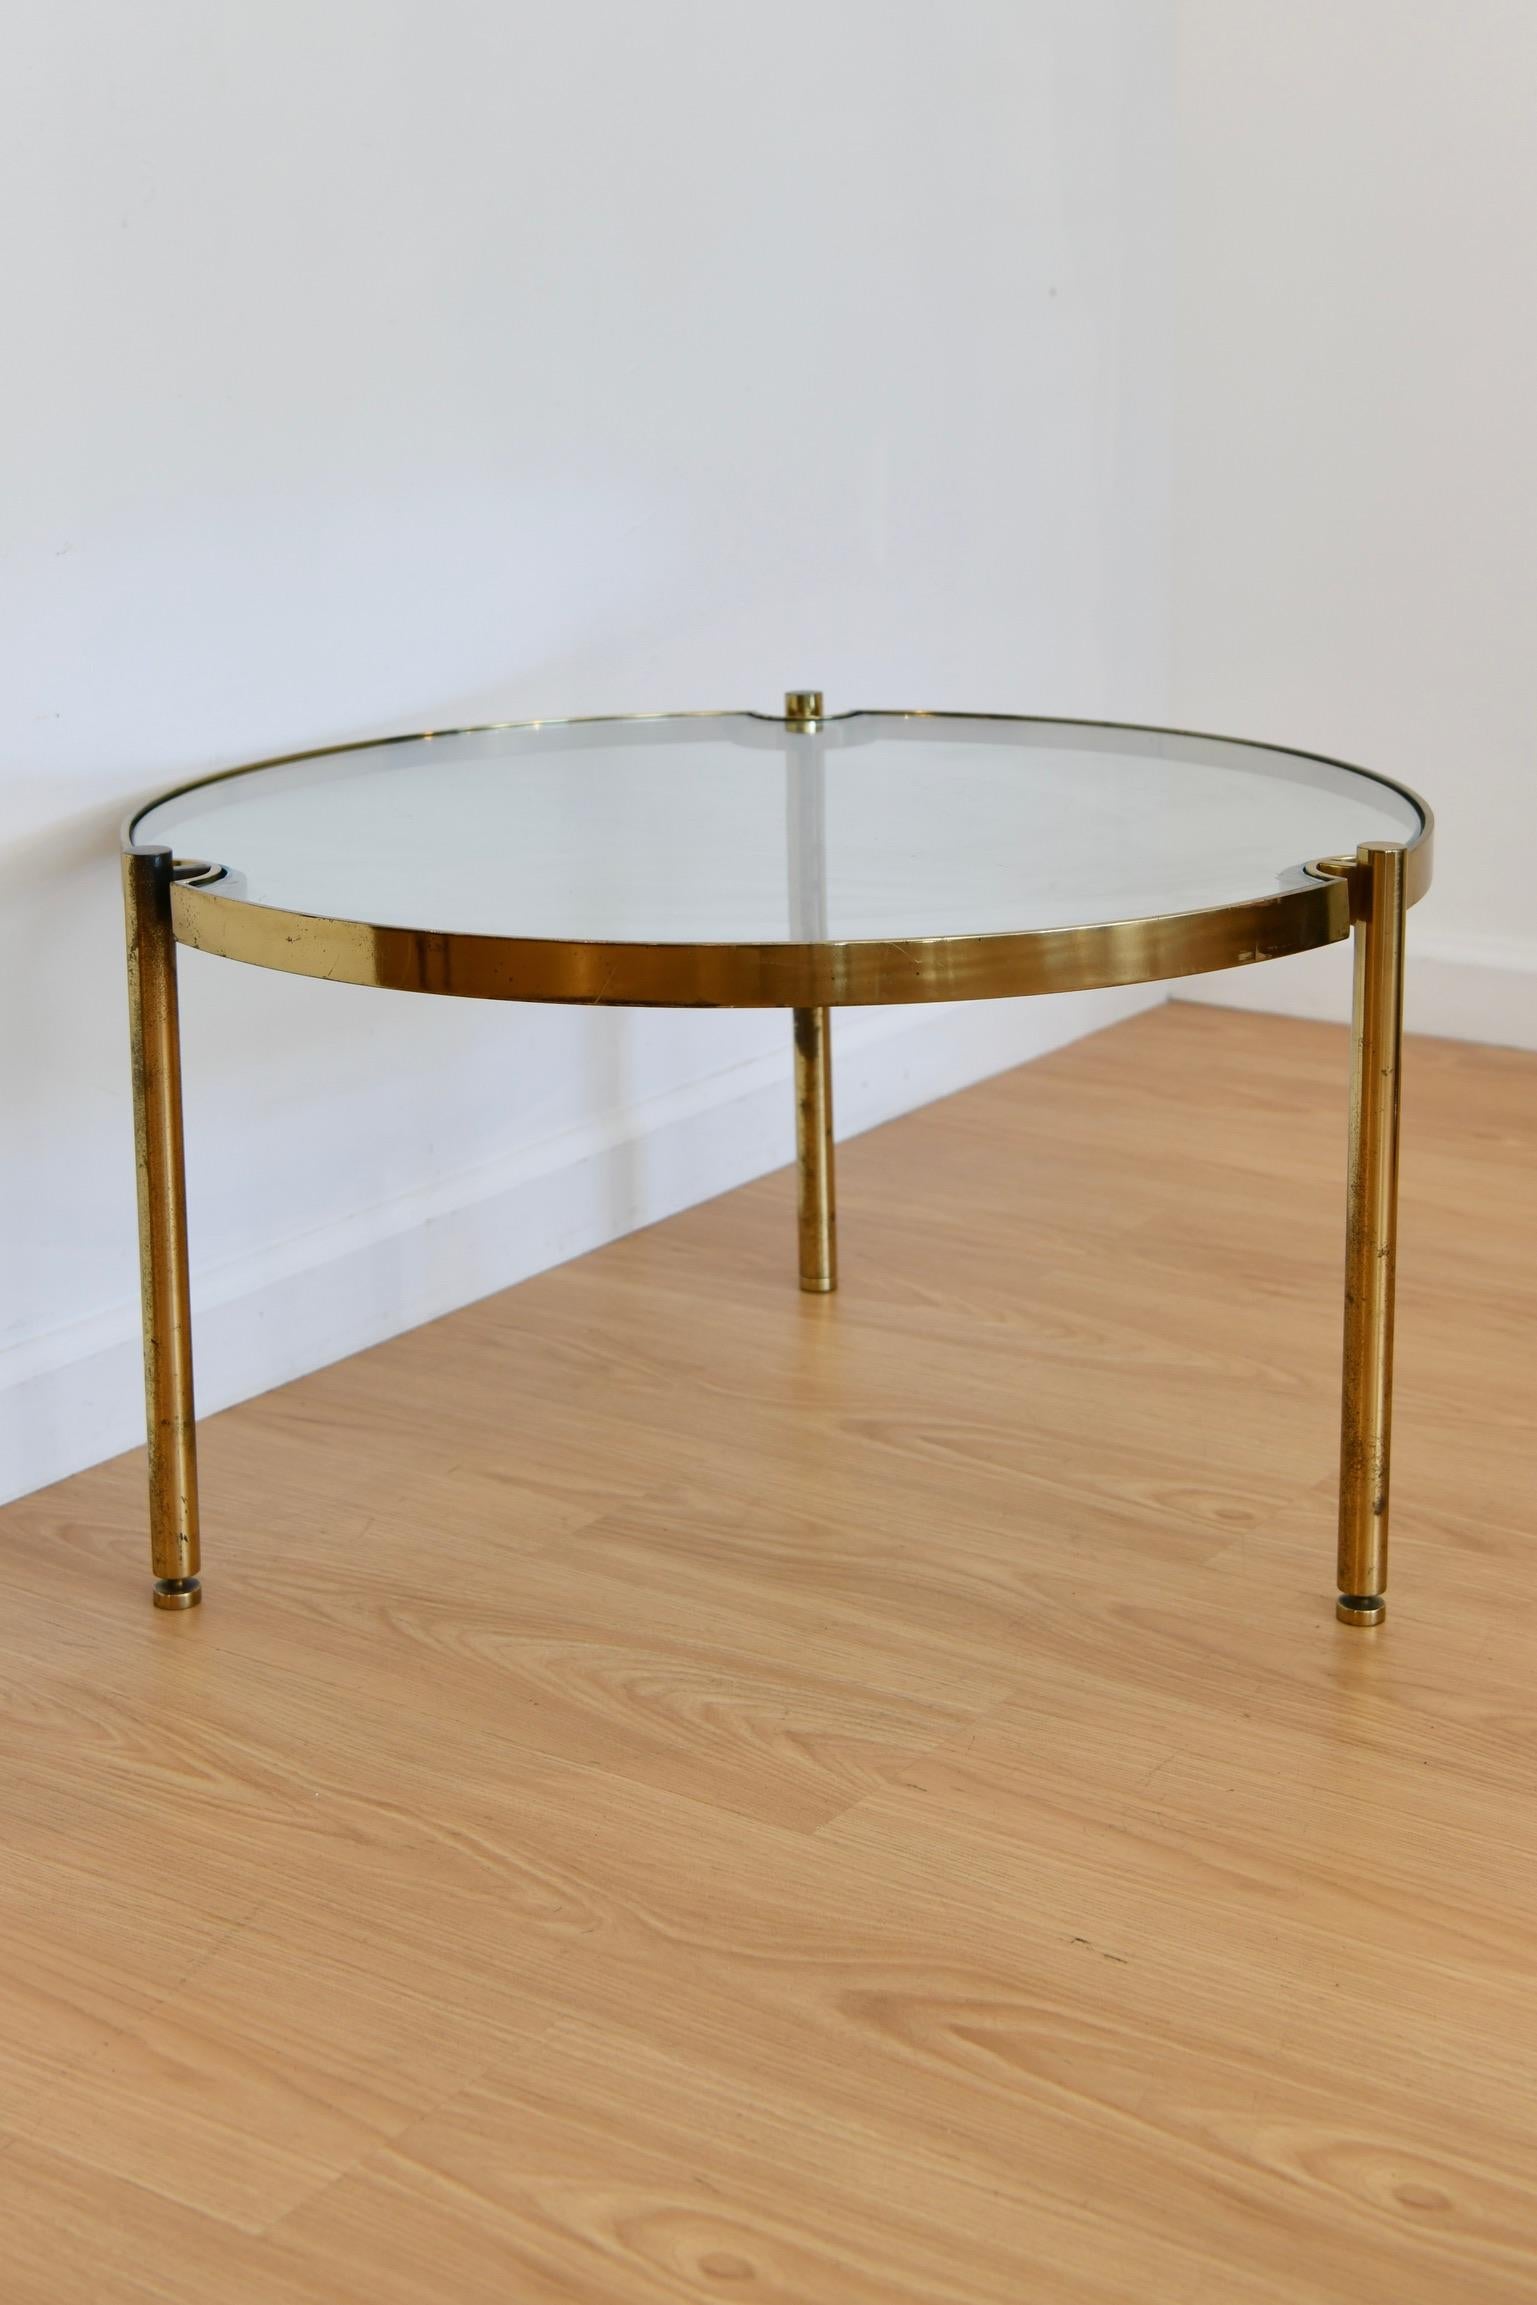 20th Century Midcentury Round Brass Coffee Table For Sale